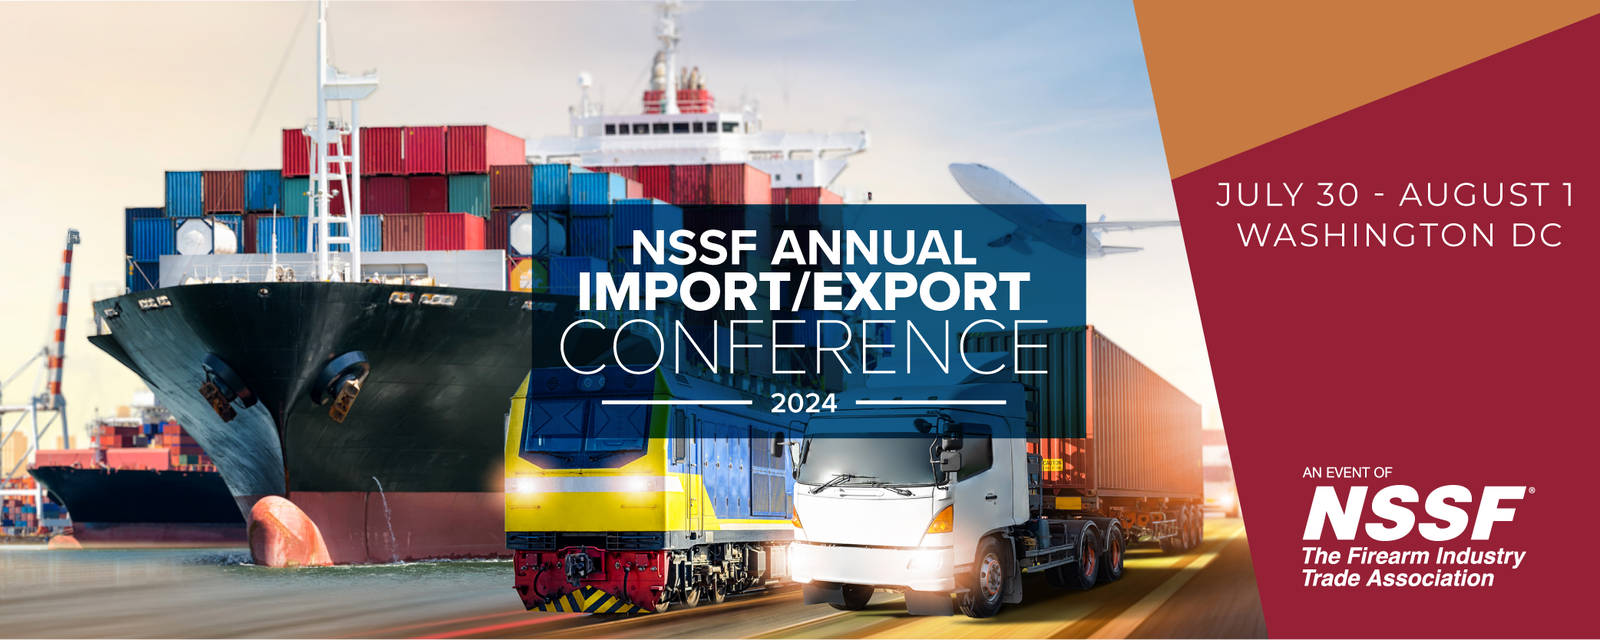 2024 NSSF Annual Import/Export Conference 